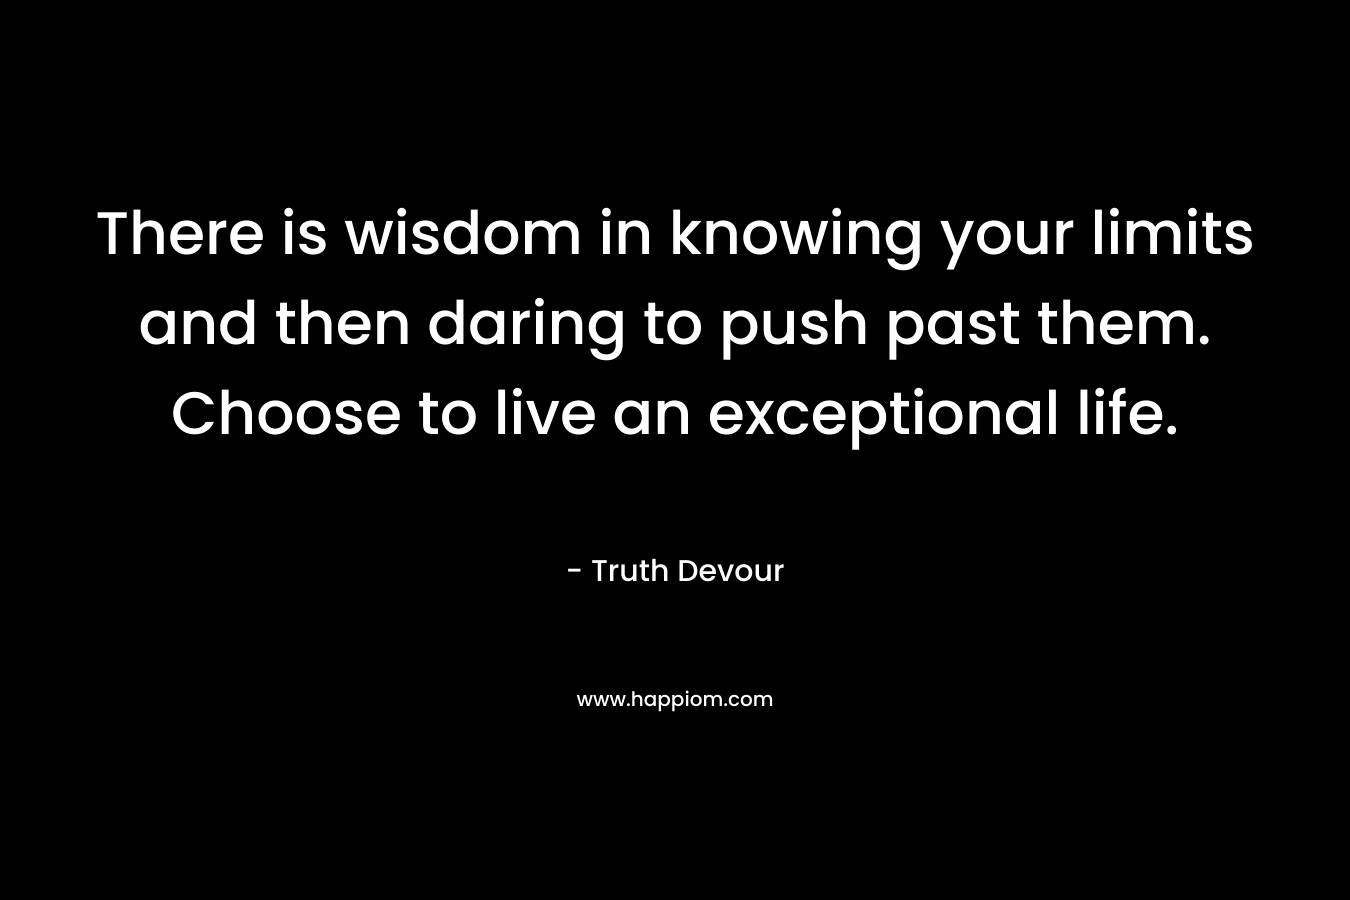 There is wisdom in knowing your limits and then daring to push past them. Choose to live an exceptional life.